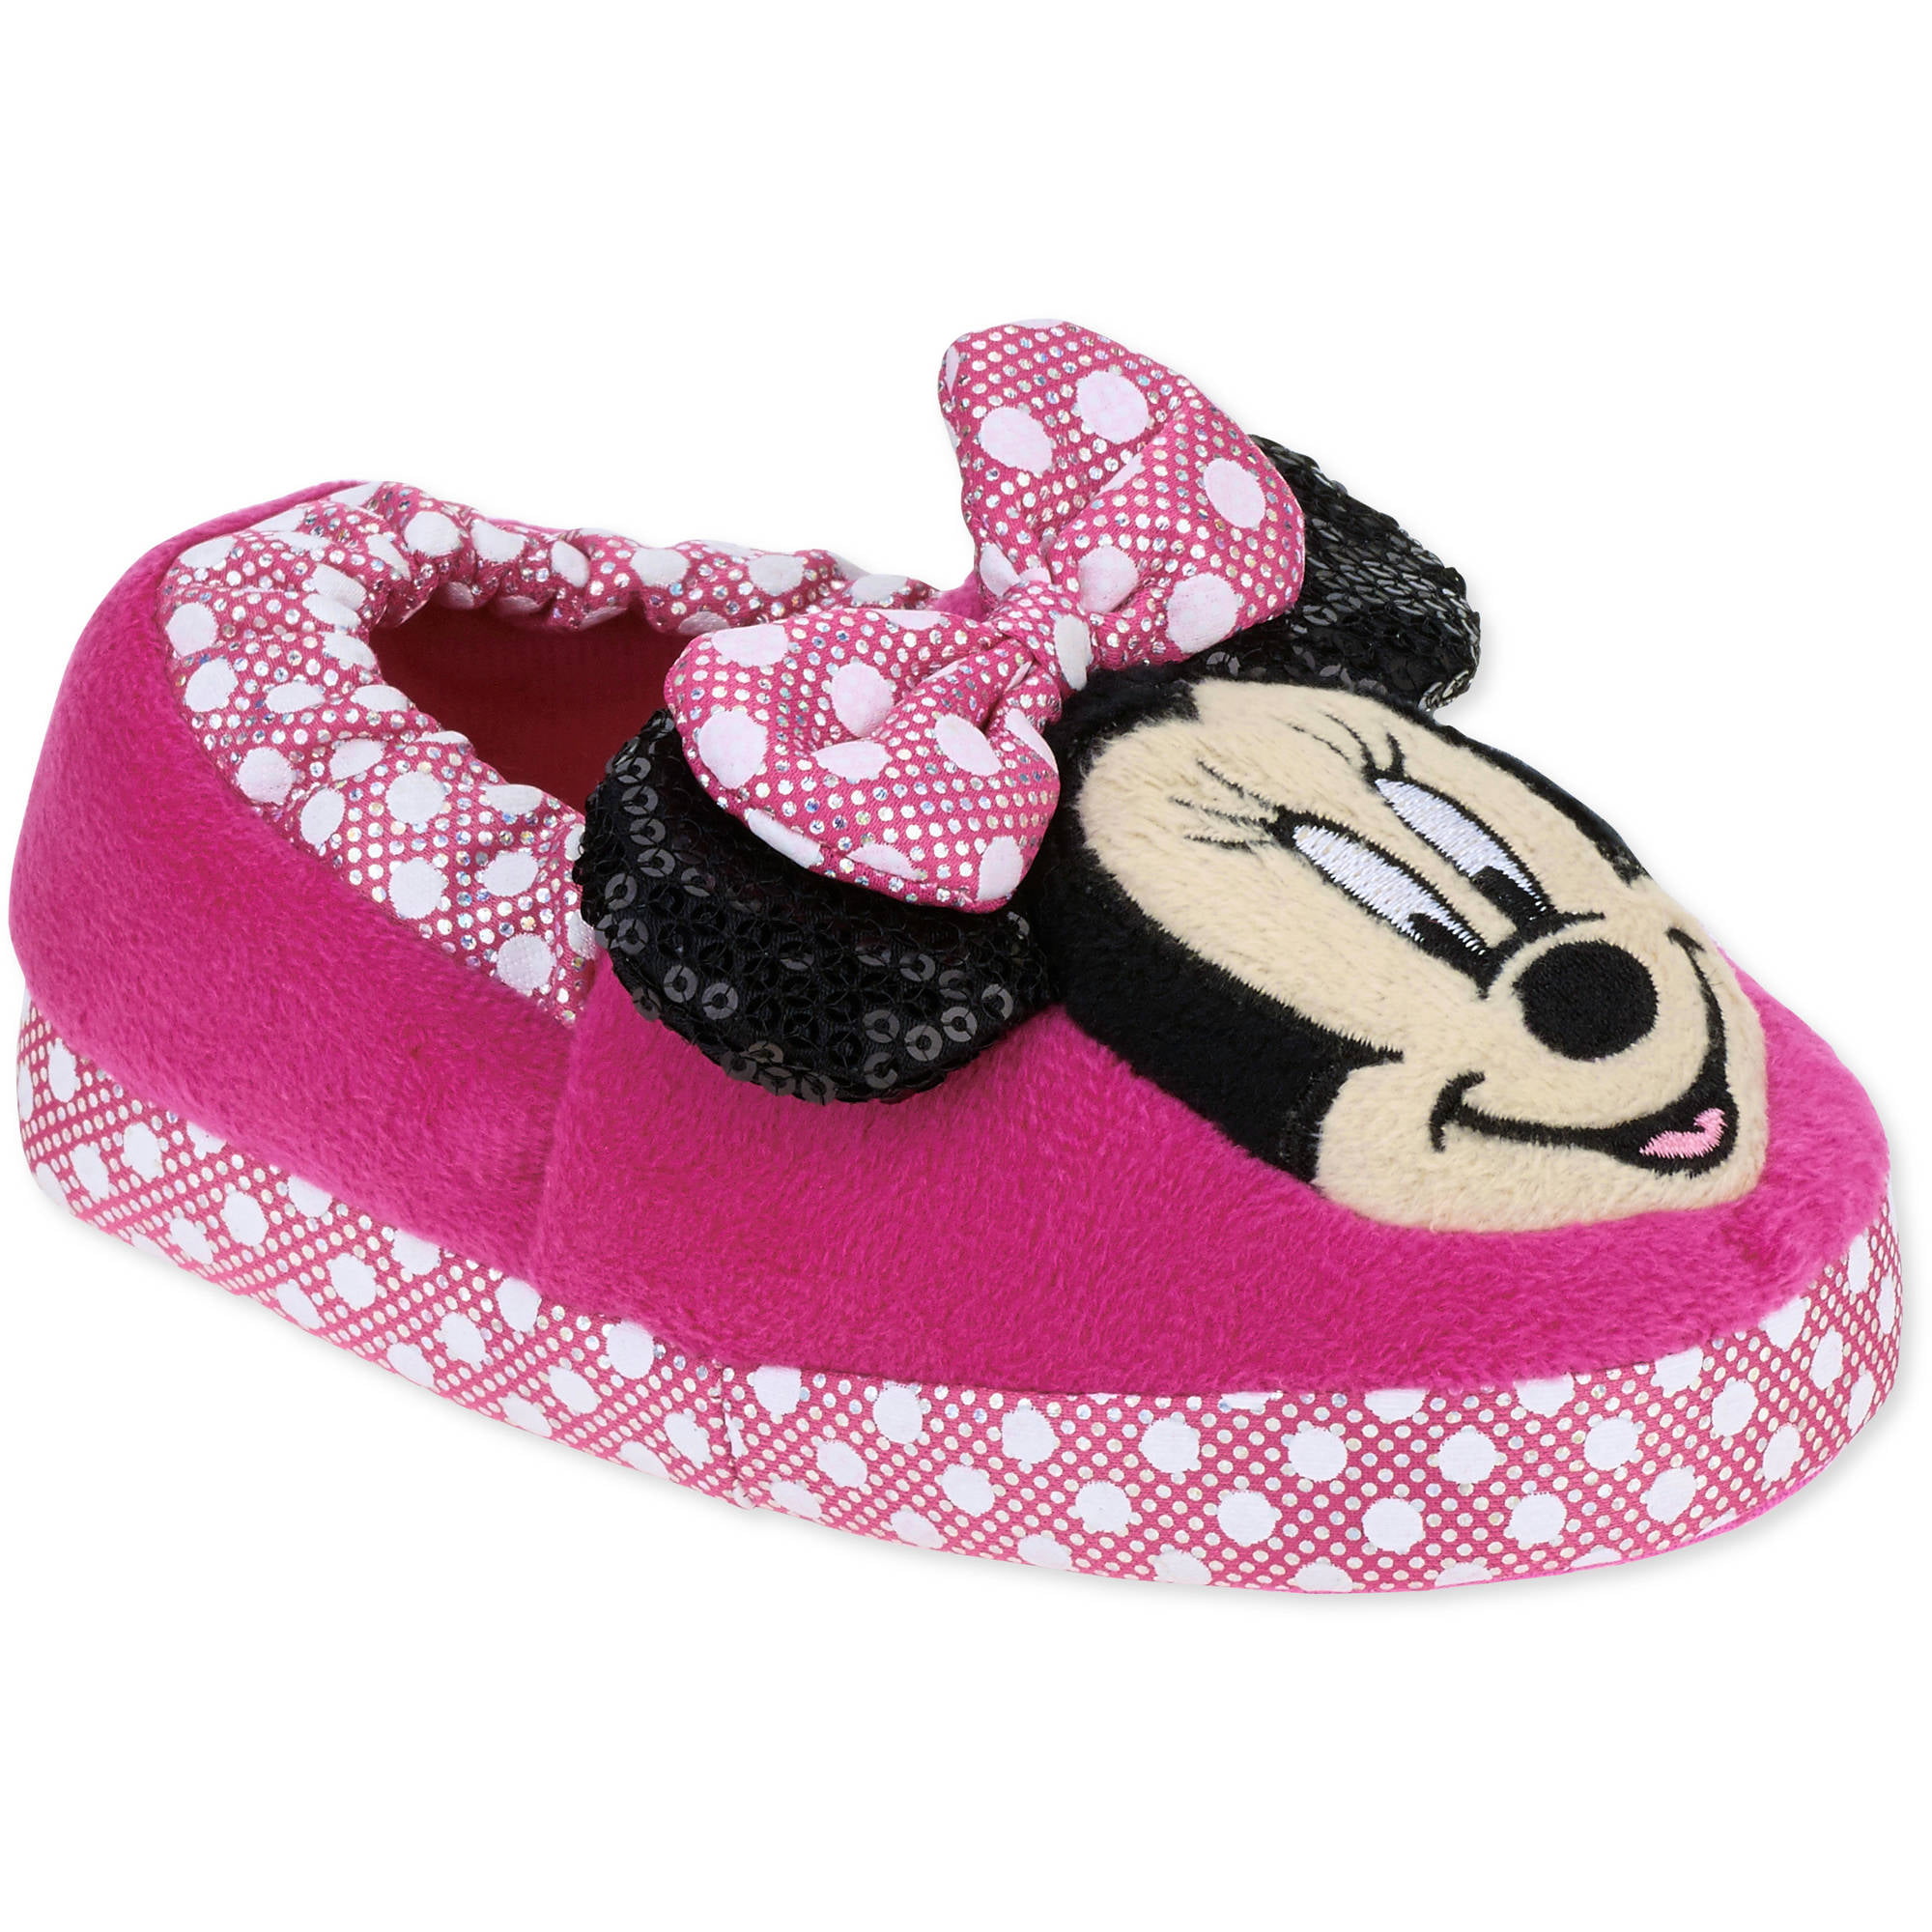 childrens size 7 slippers